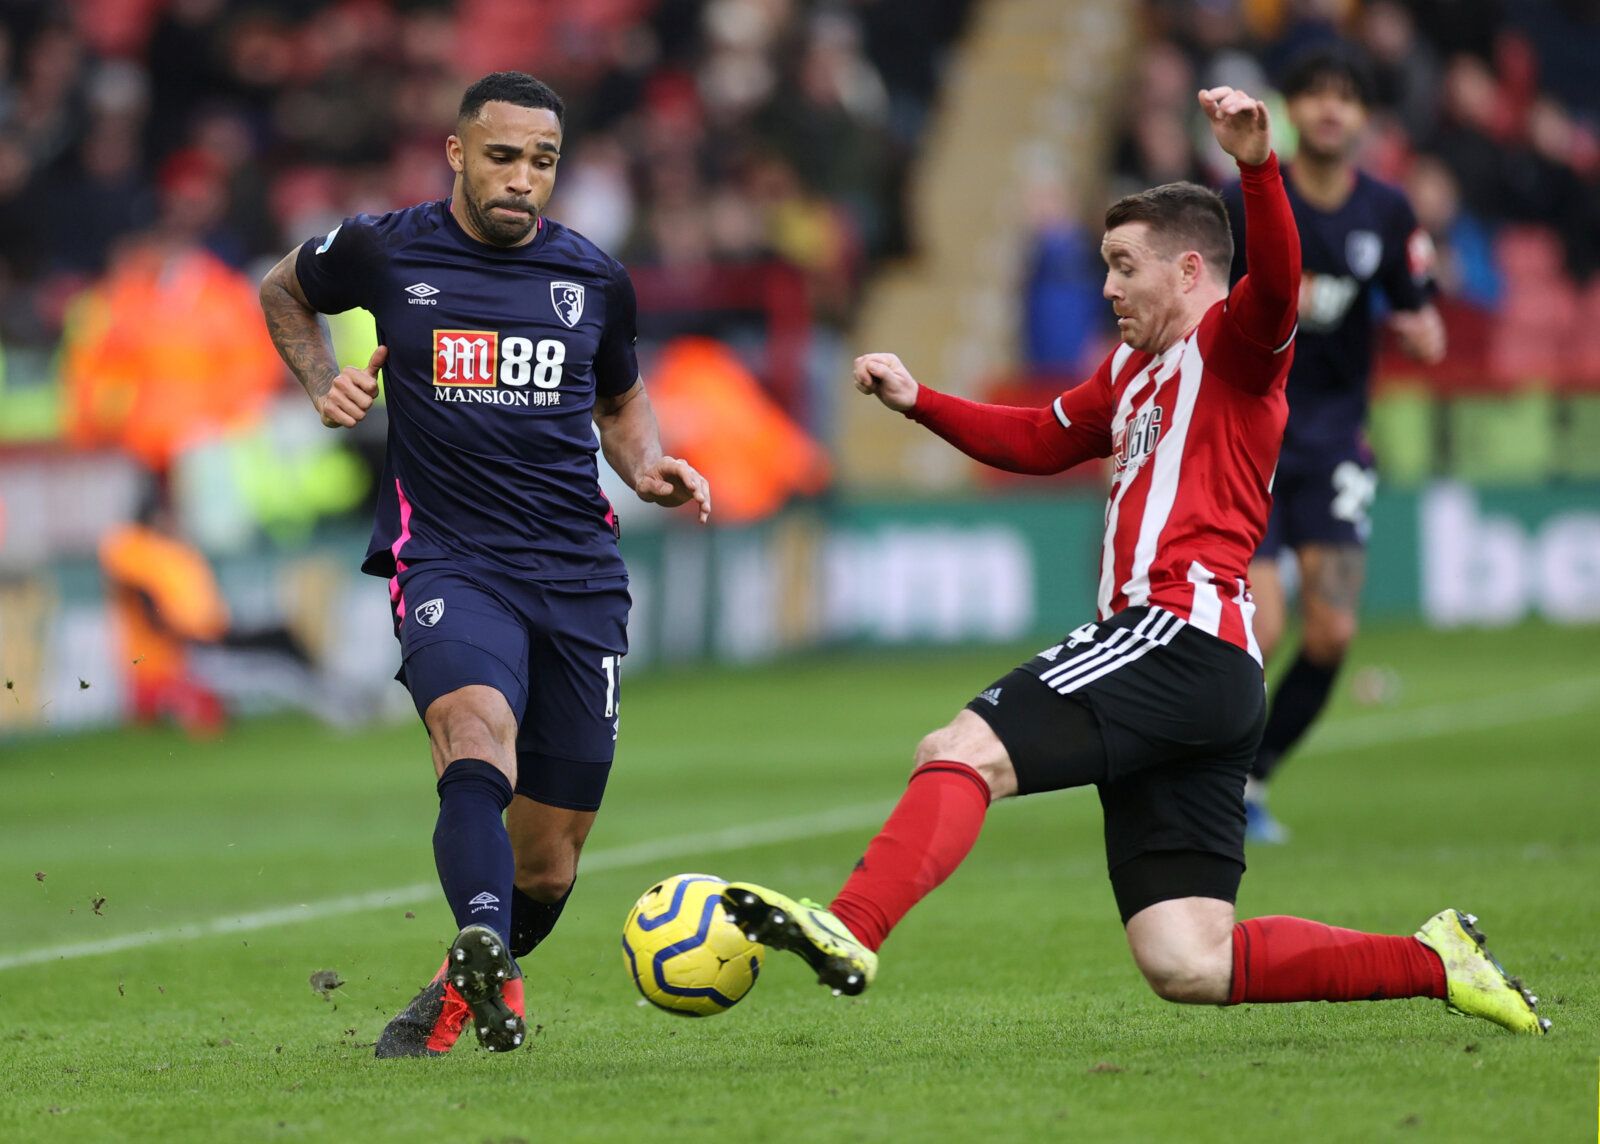 Soccer Football - Premier League - Sheffield United v AFC Bournemouth - Bramall Lane, Sheffield, Britain - February 9, 2020  Bournemouth's Callum Wilson in action with Sheffield United's John Fleck   Action Images via Reuters/Carl Recine  EDITORIAL USE ONLY. No use with unauthorized audio, video, data, fixture lists, club/league logos or 